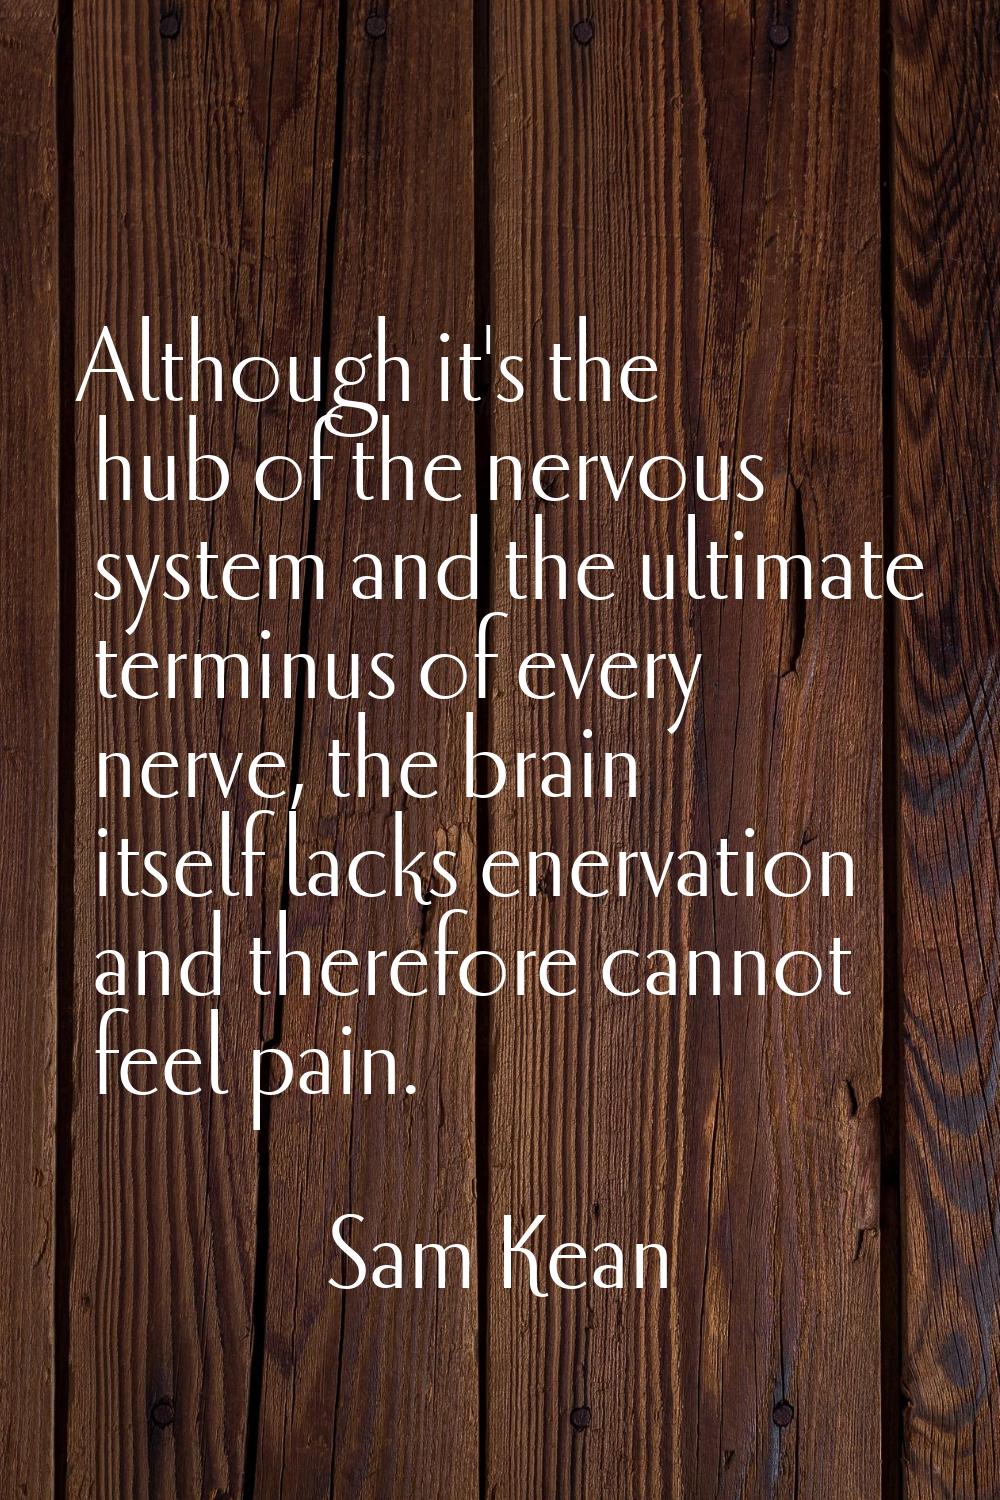 Although it's the hub of the nervous system and the ultimate terminus of every nerve, the brain its